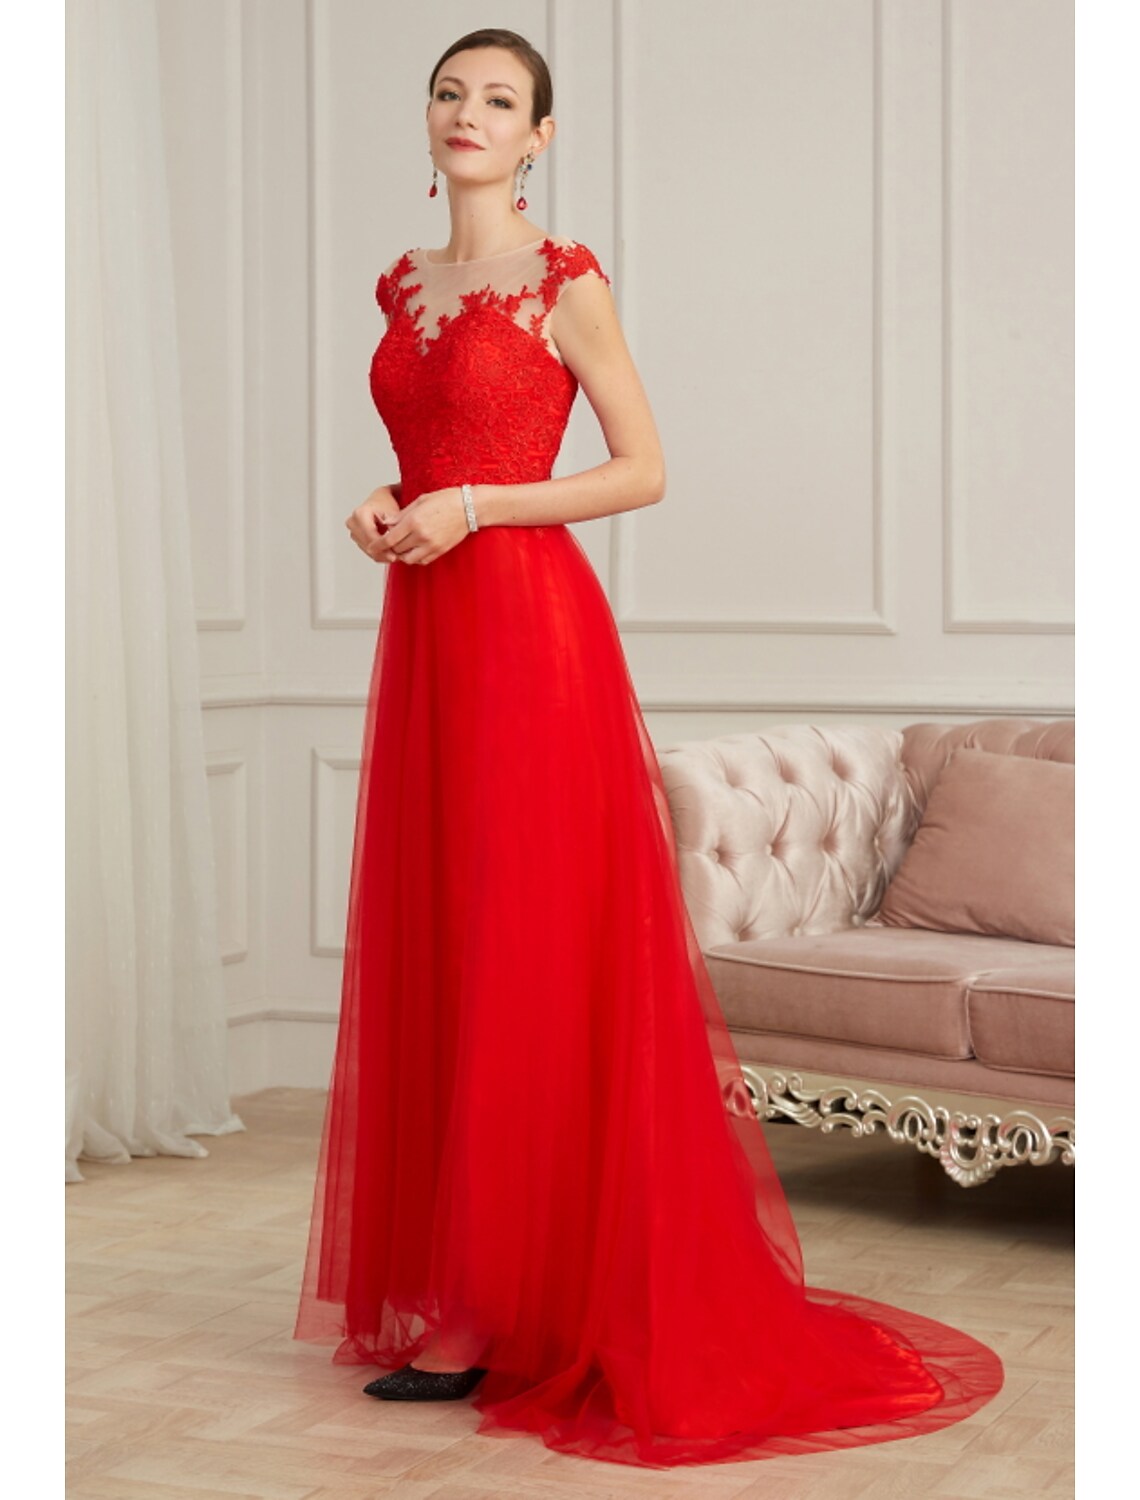 Evening Gown Elegant Dress Engagement Sleeveless Illusion Neck Lace with Slit Appliques